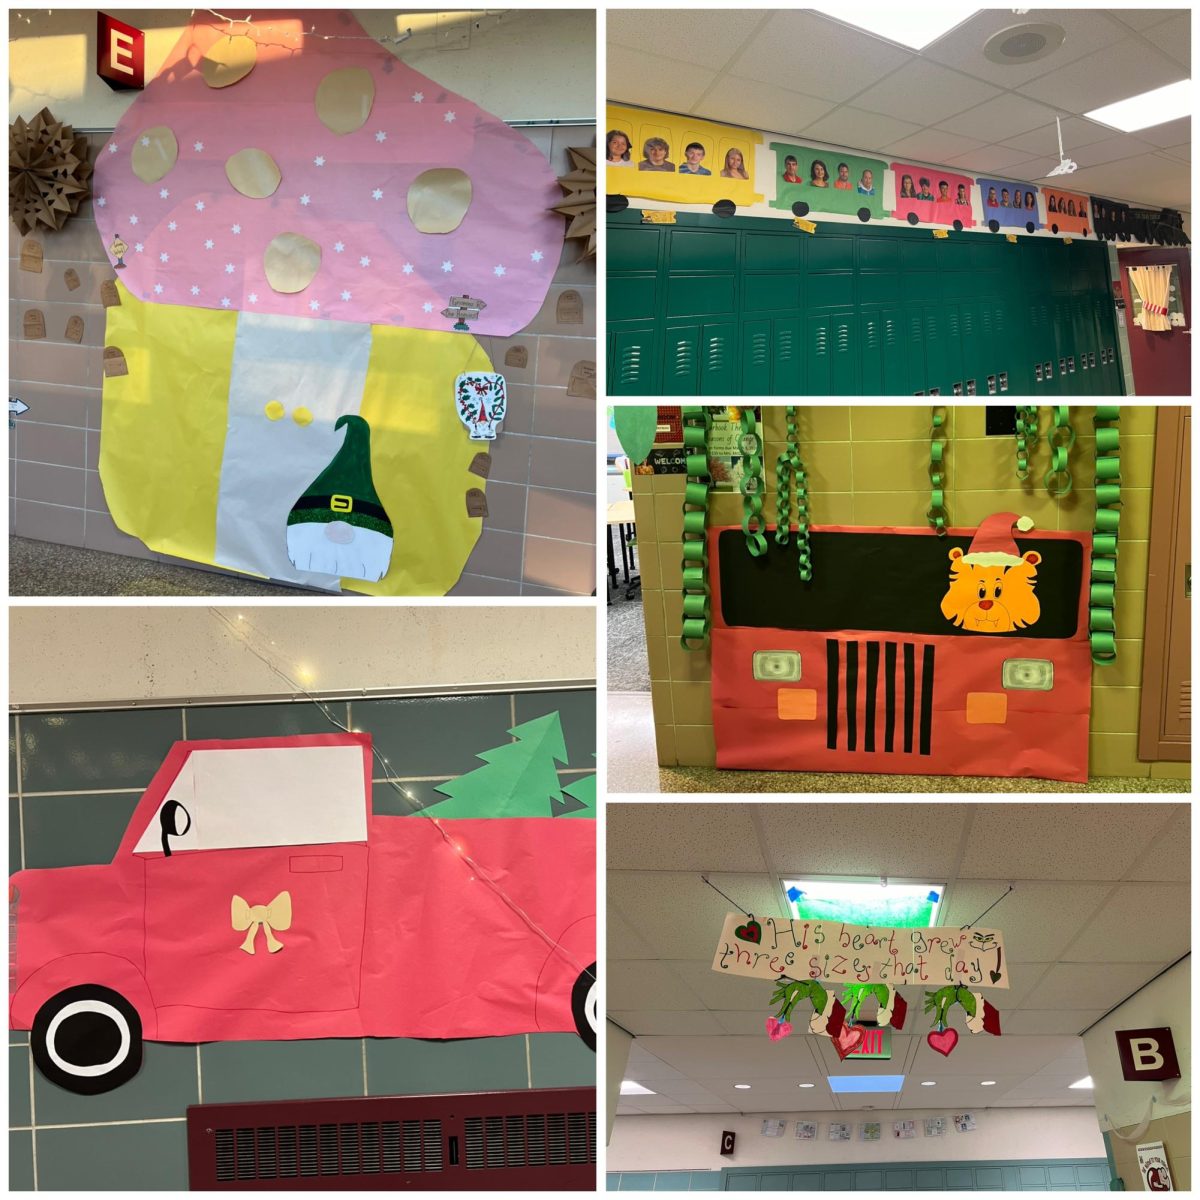 HAHS students participate in holiday hallway decorating